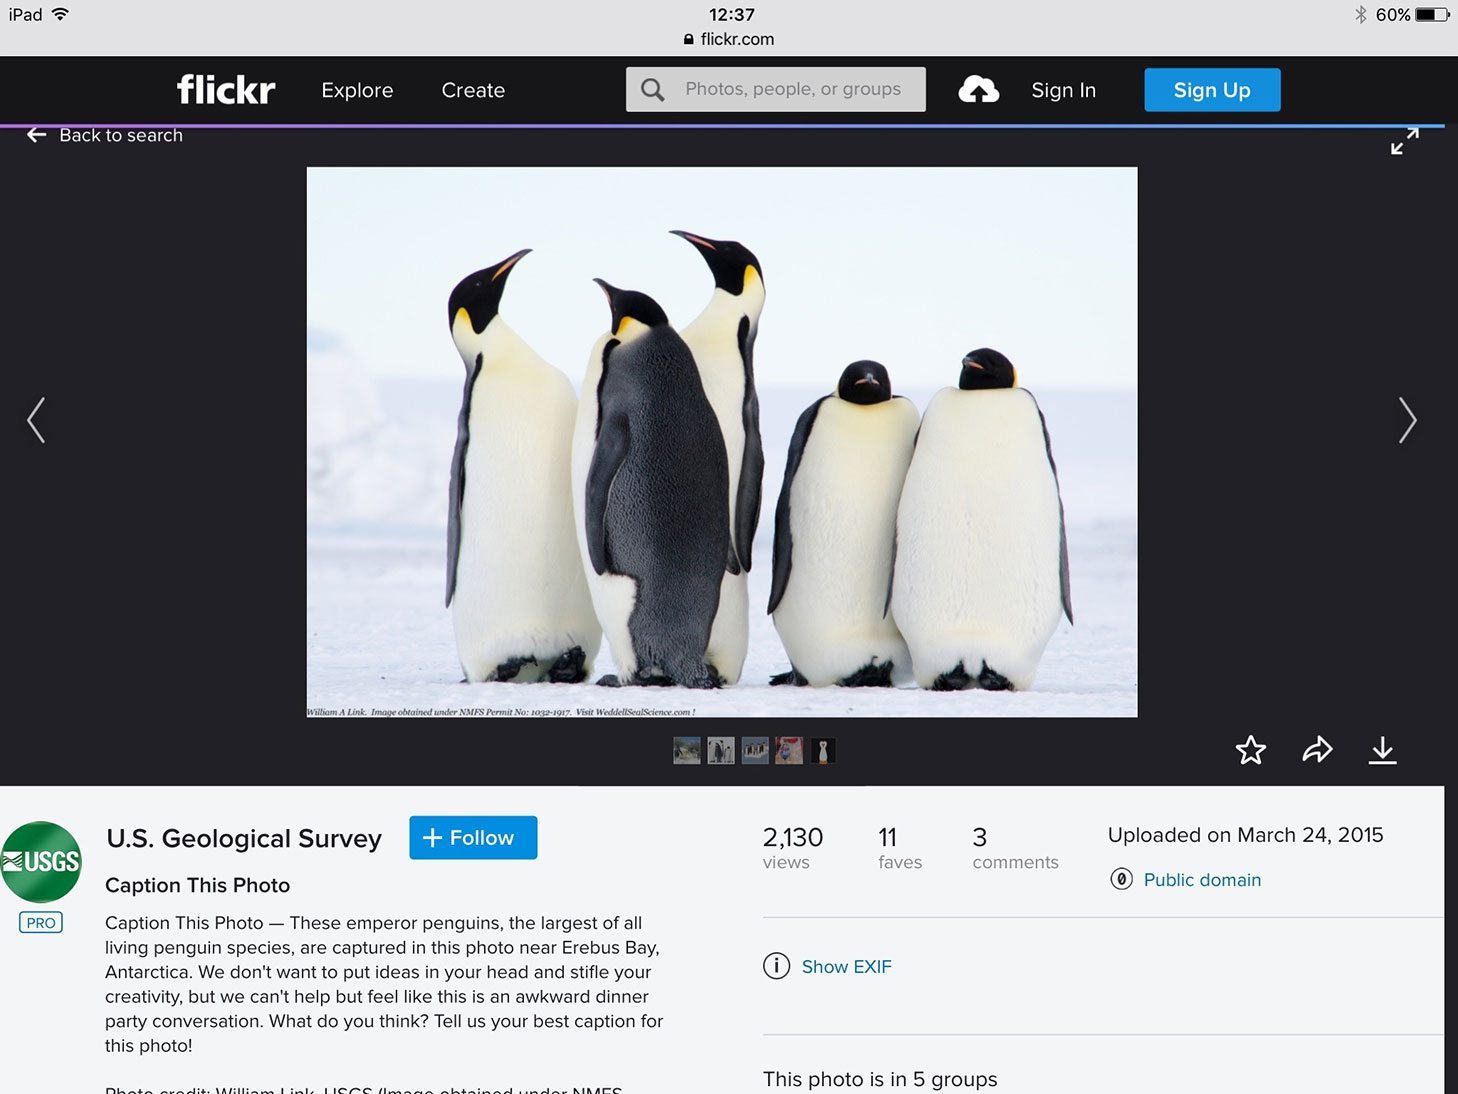 An image of penguins found on Flickr